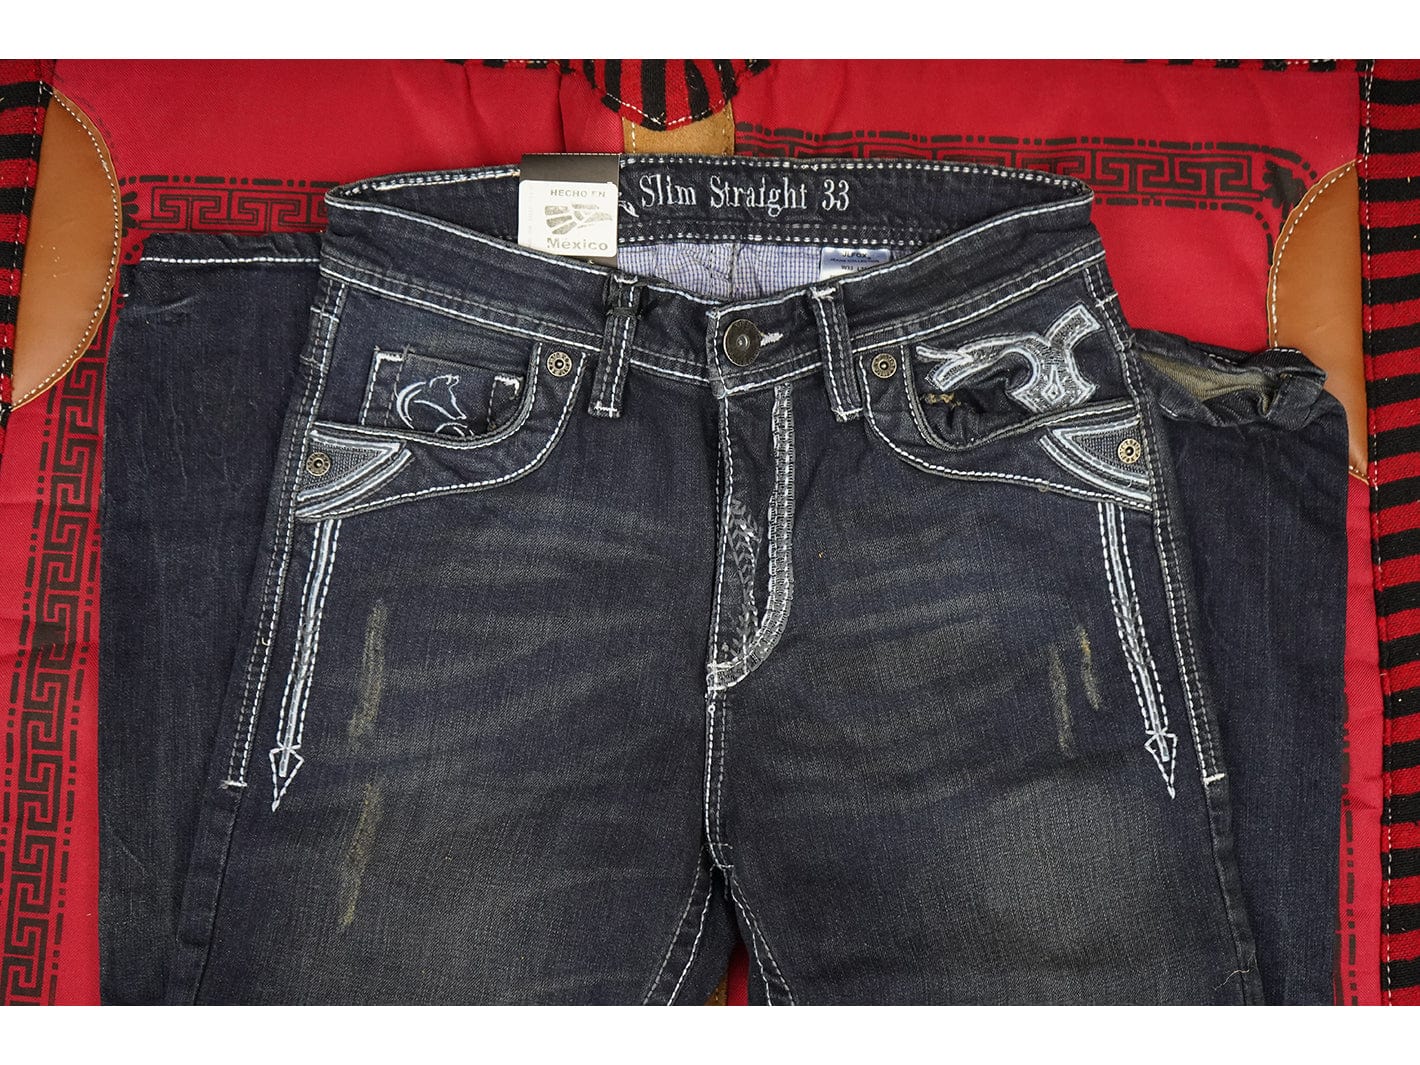 Western Jeans and Western Pants for Men